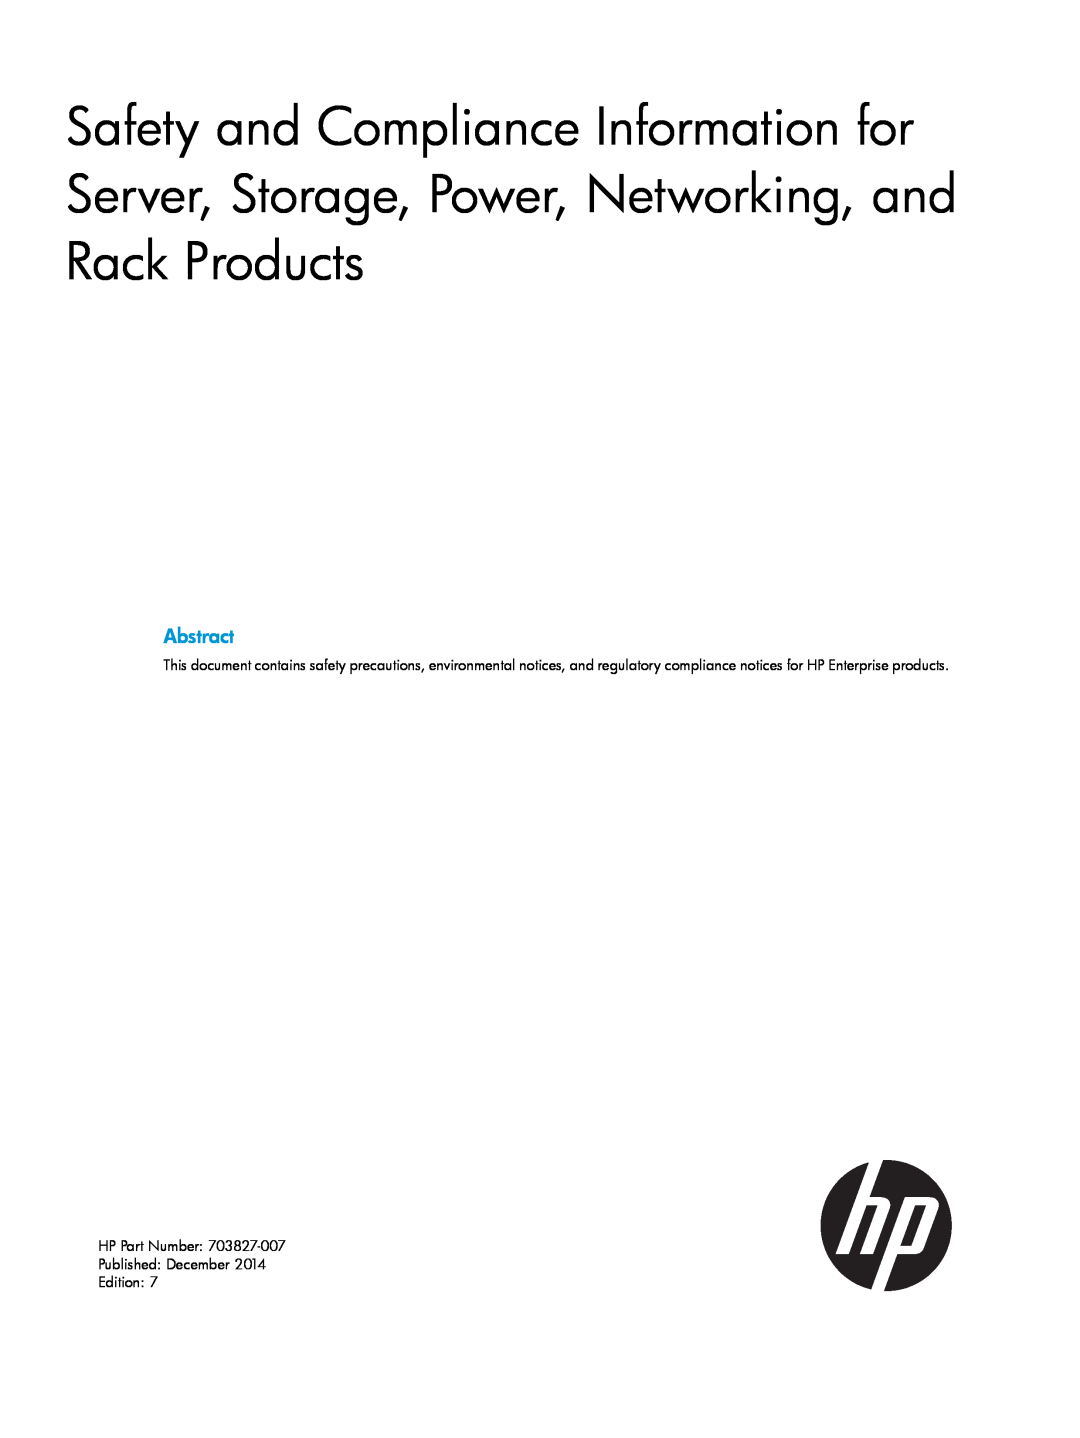 HP Networking Safety and Compliance manual Abstract, HP Part Number Published December Edition 